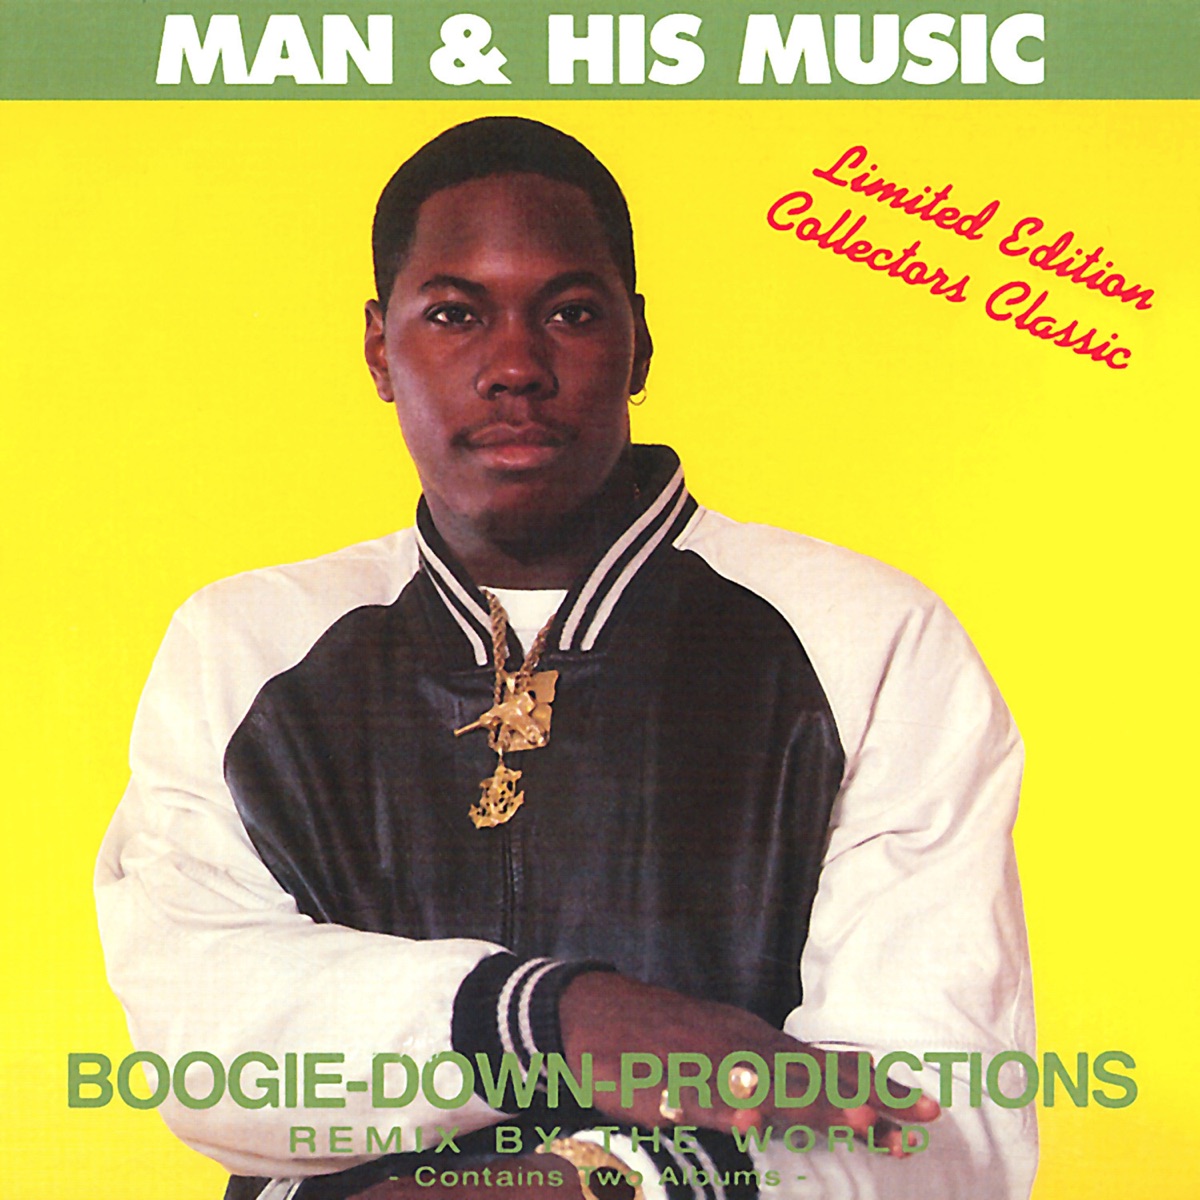 Boogie Down Productions - Say No Brother | www.vincomics.com